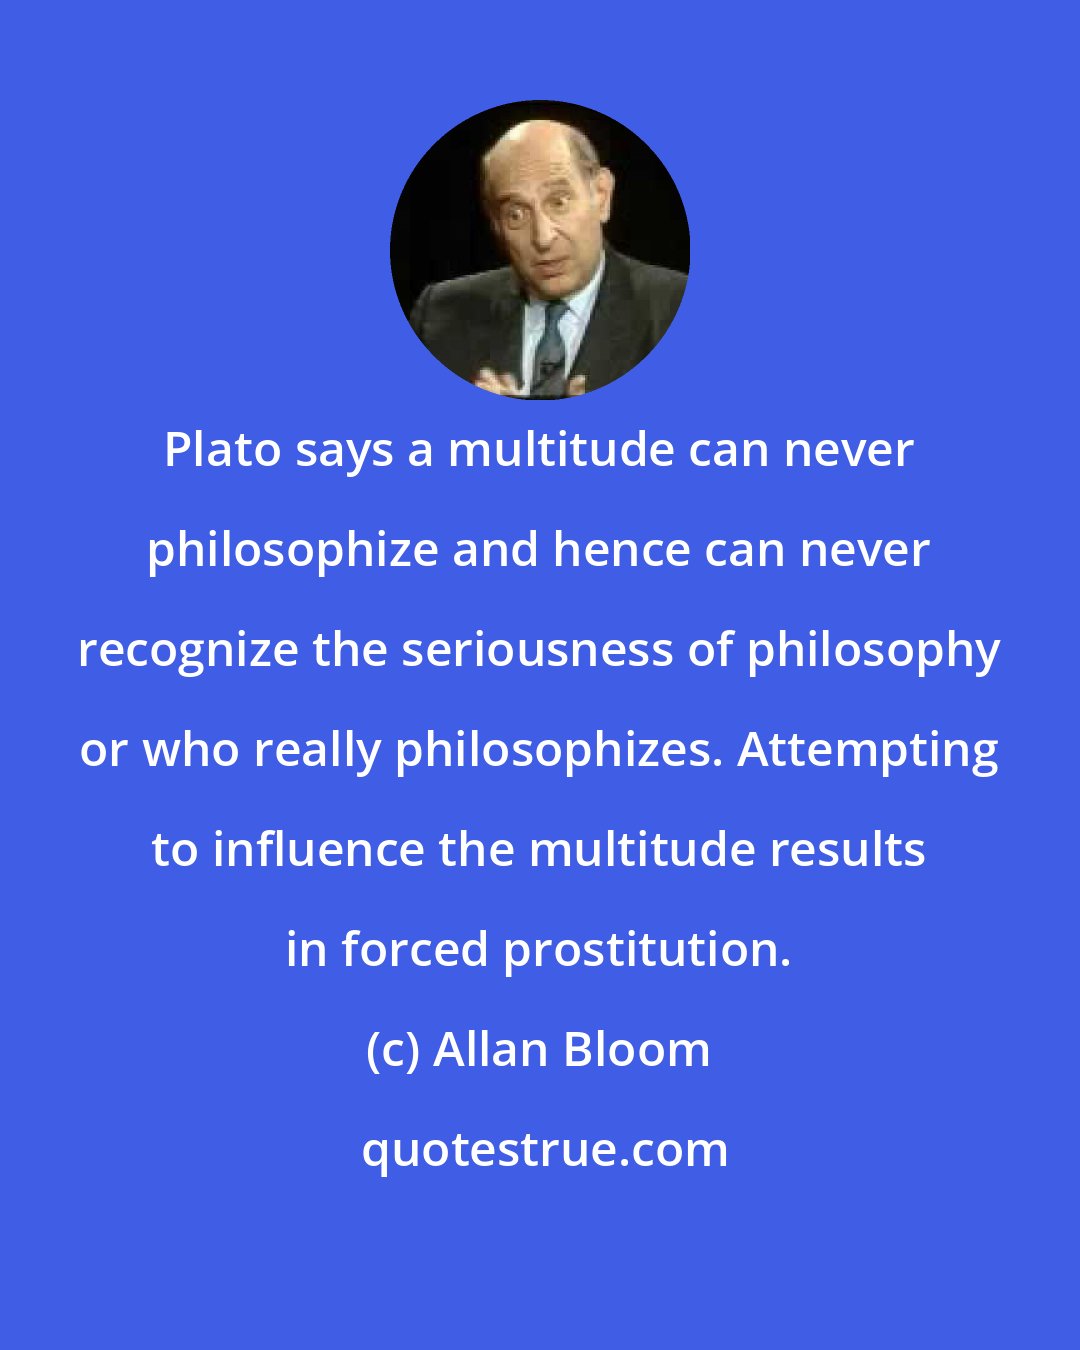 Allan Bloom: Plato says a multitude can never philosophize and hence can never recognize the seriousness of philosophy or who really philosophizes. Attempting to influence the multitude results in forced prostitution.